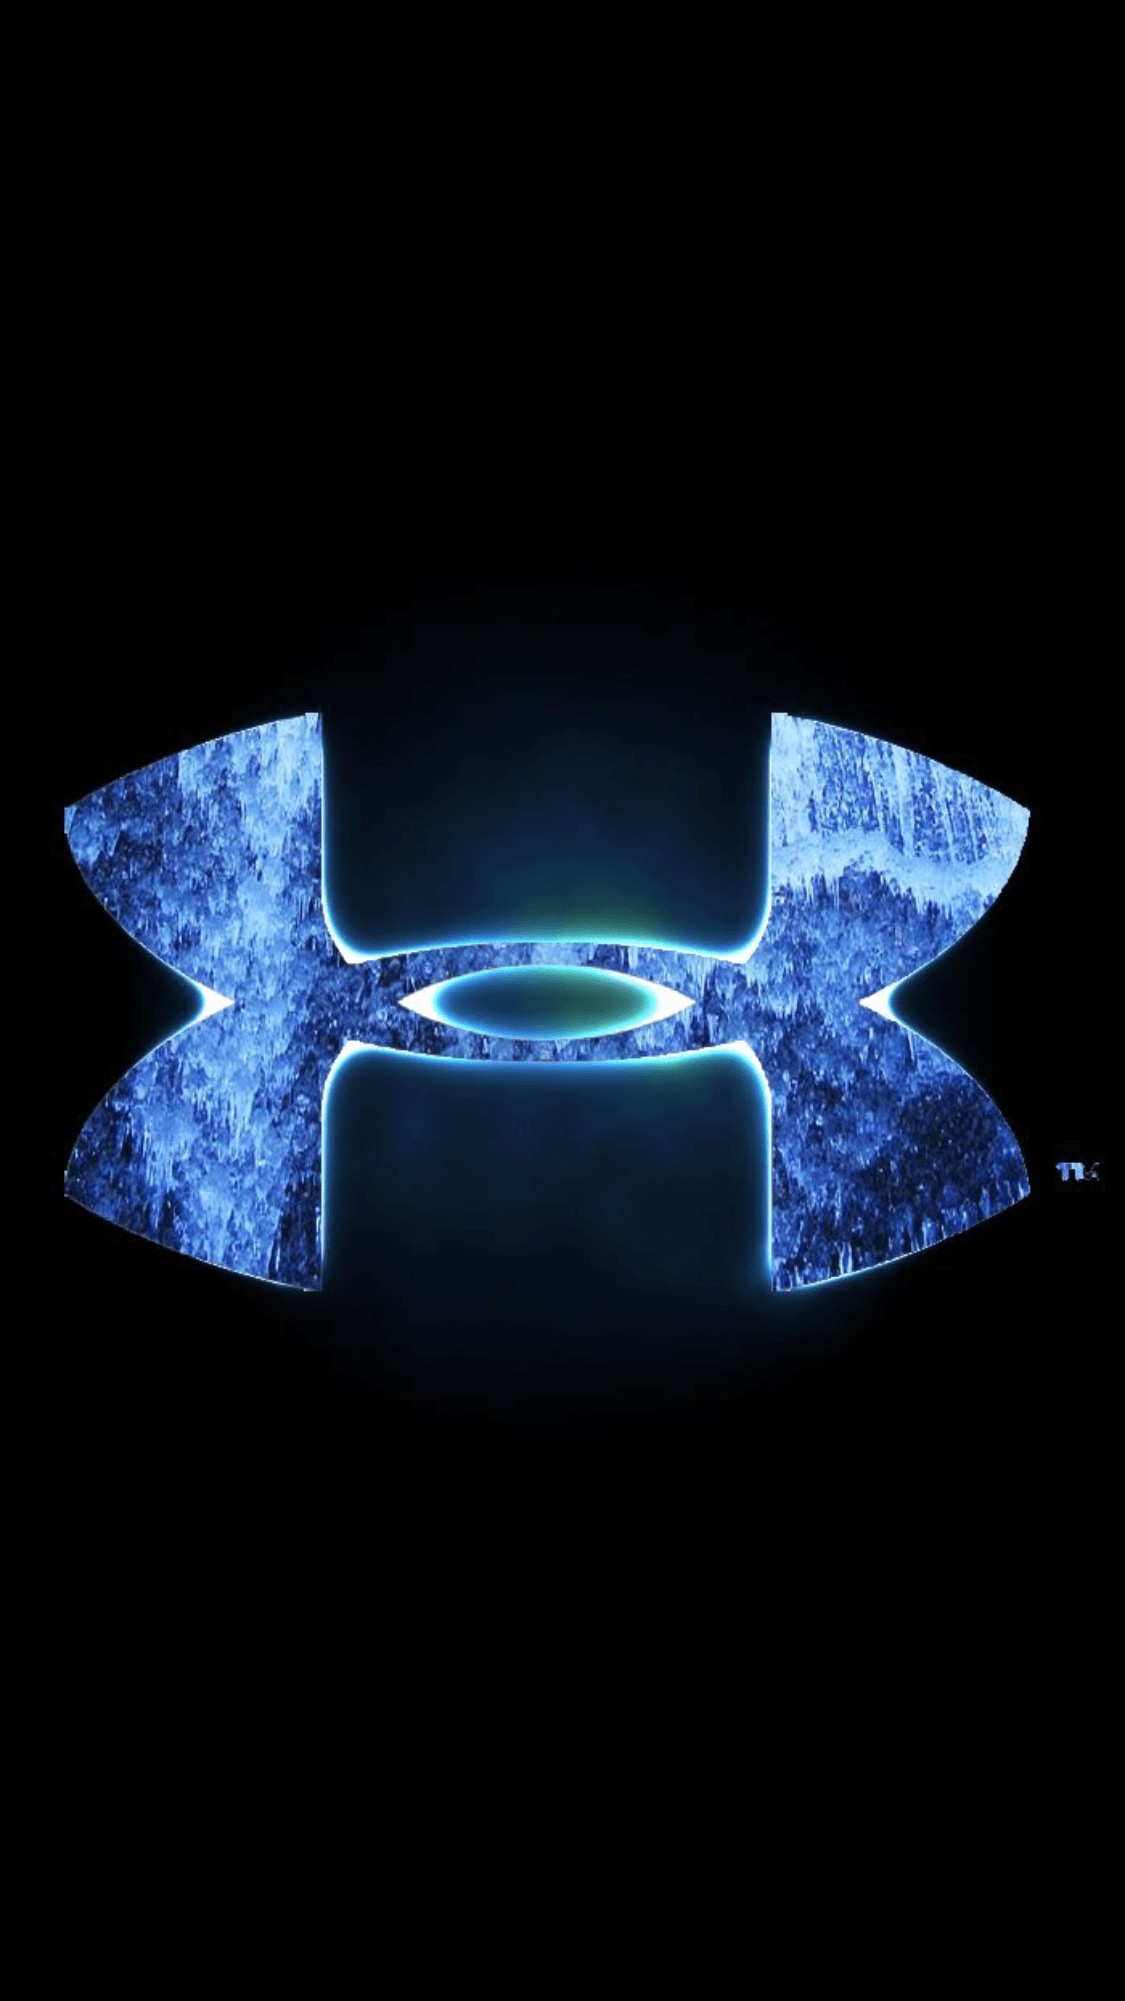 UnderArmour. Wallpaper and cases. Under armour